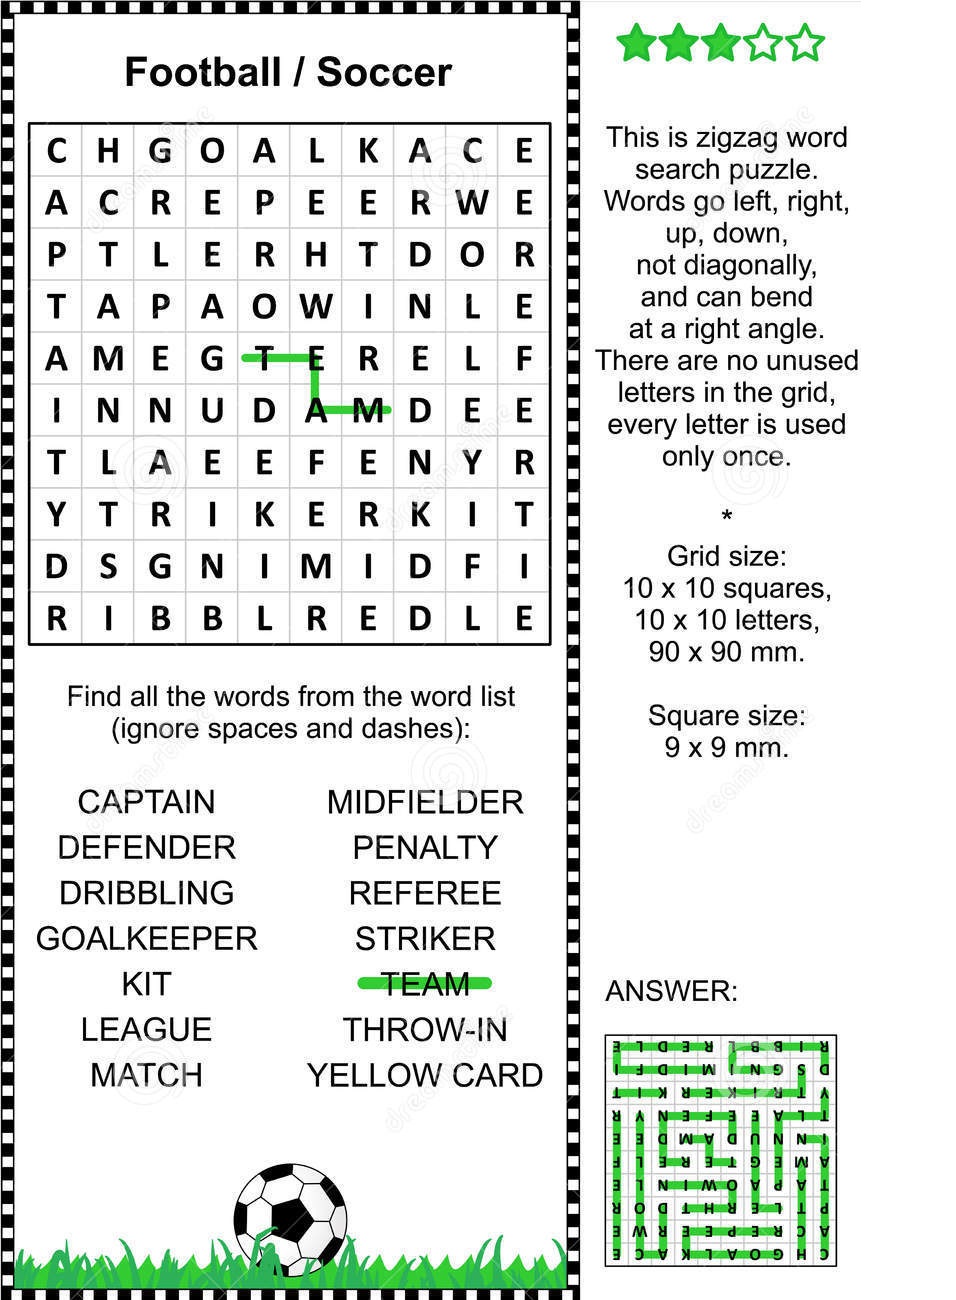 soccer-word-search-2016